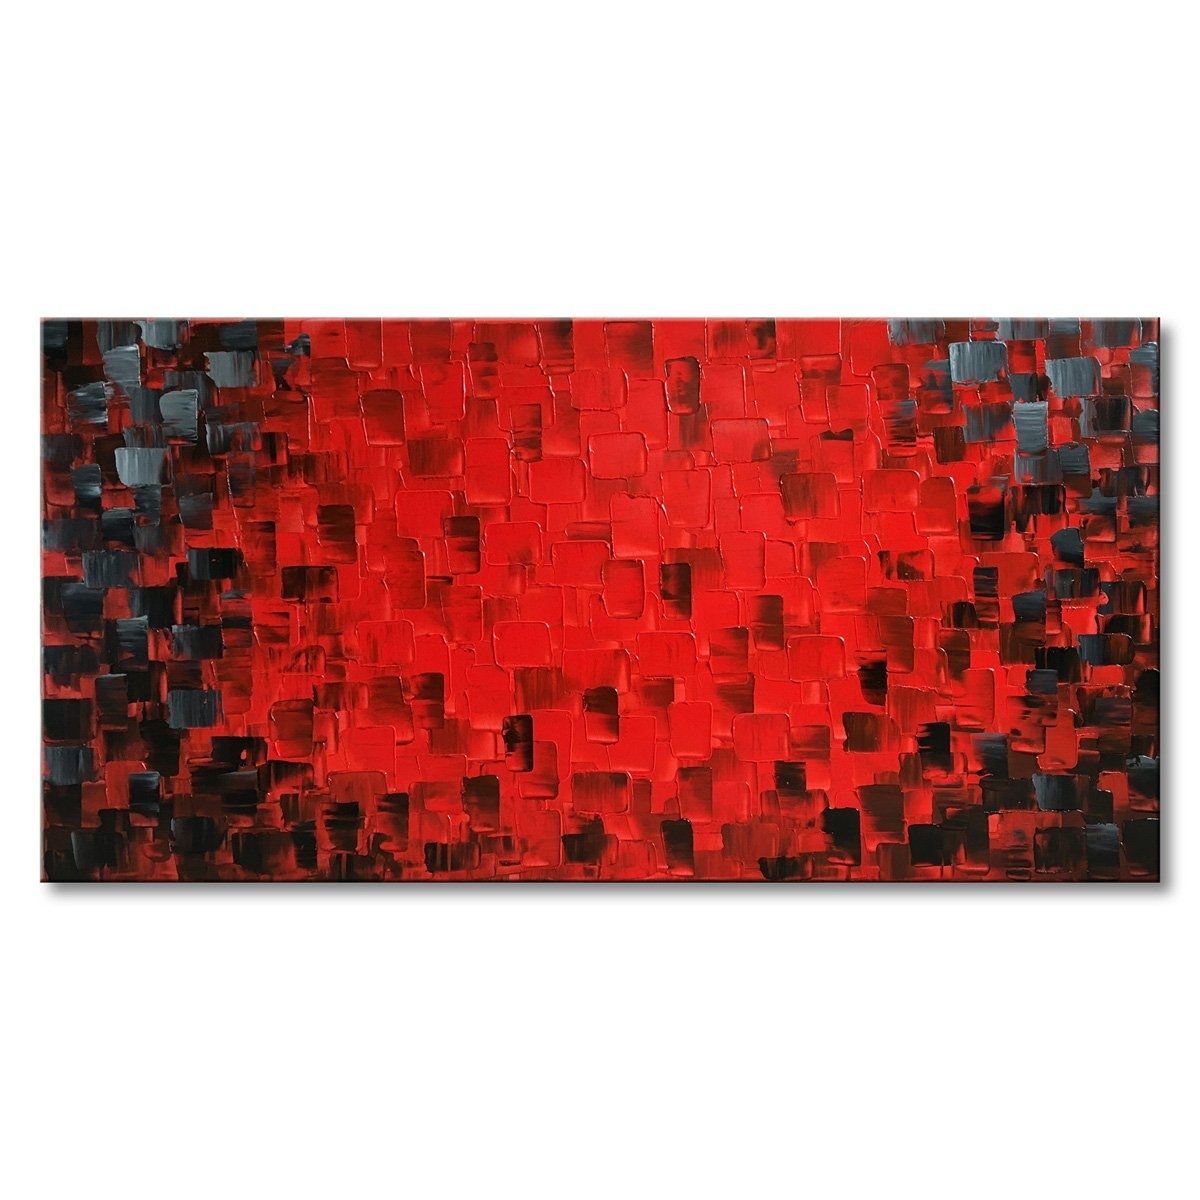 Red Canvas Art: Amazon Pertaining To Red Canvas Wall Art (View 3 of 20)